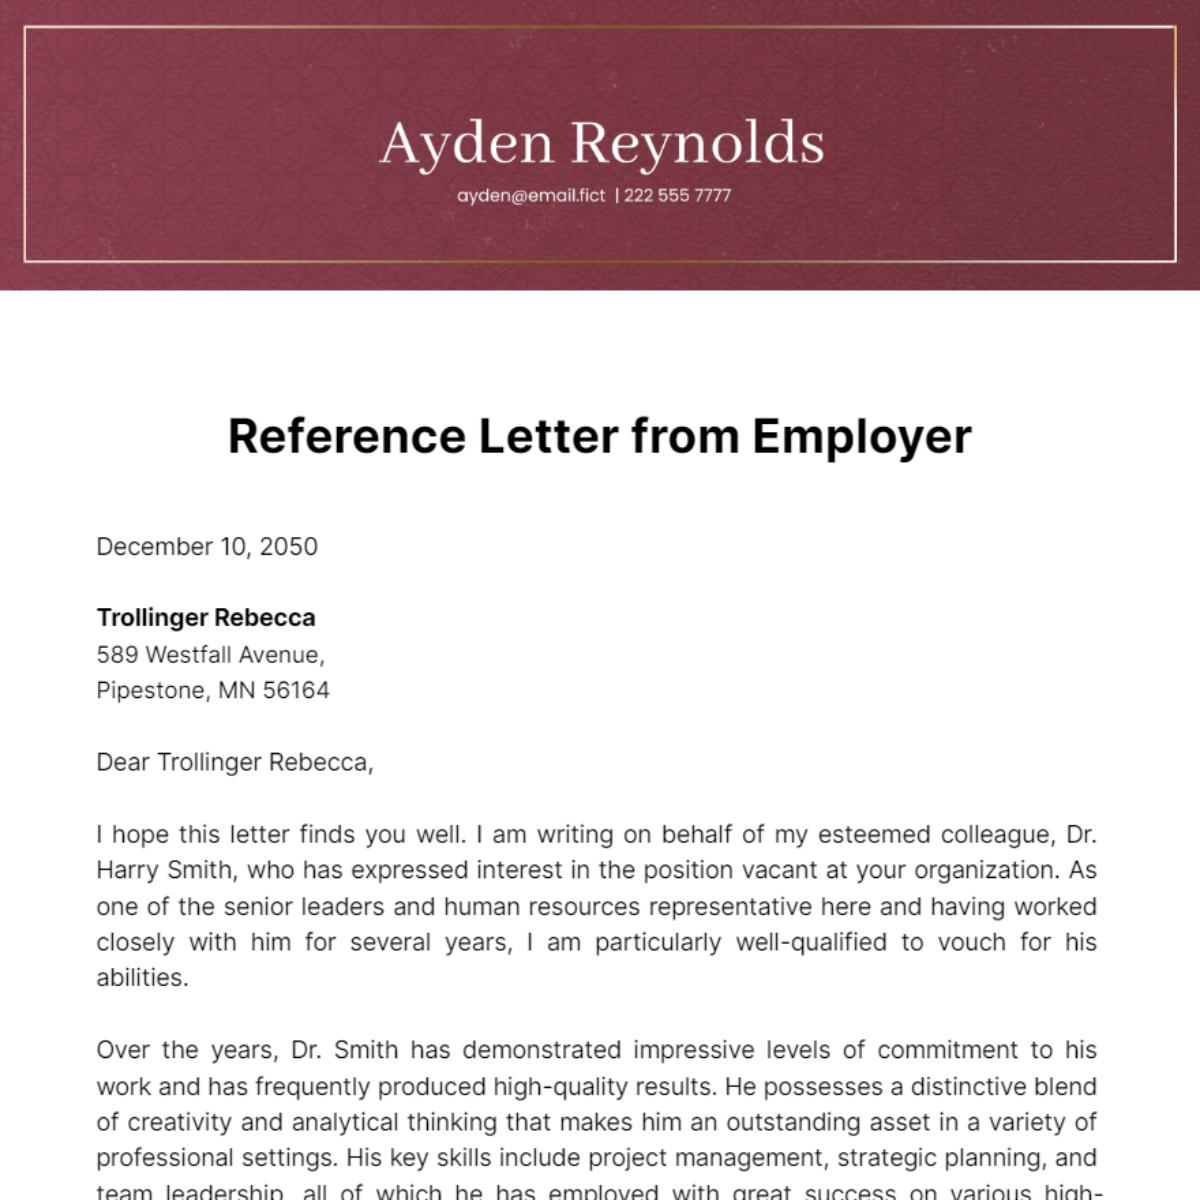 Reference Letter from Employer Template